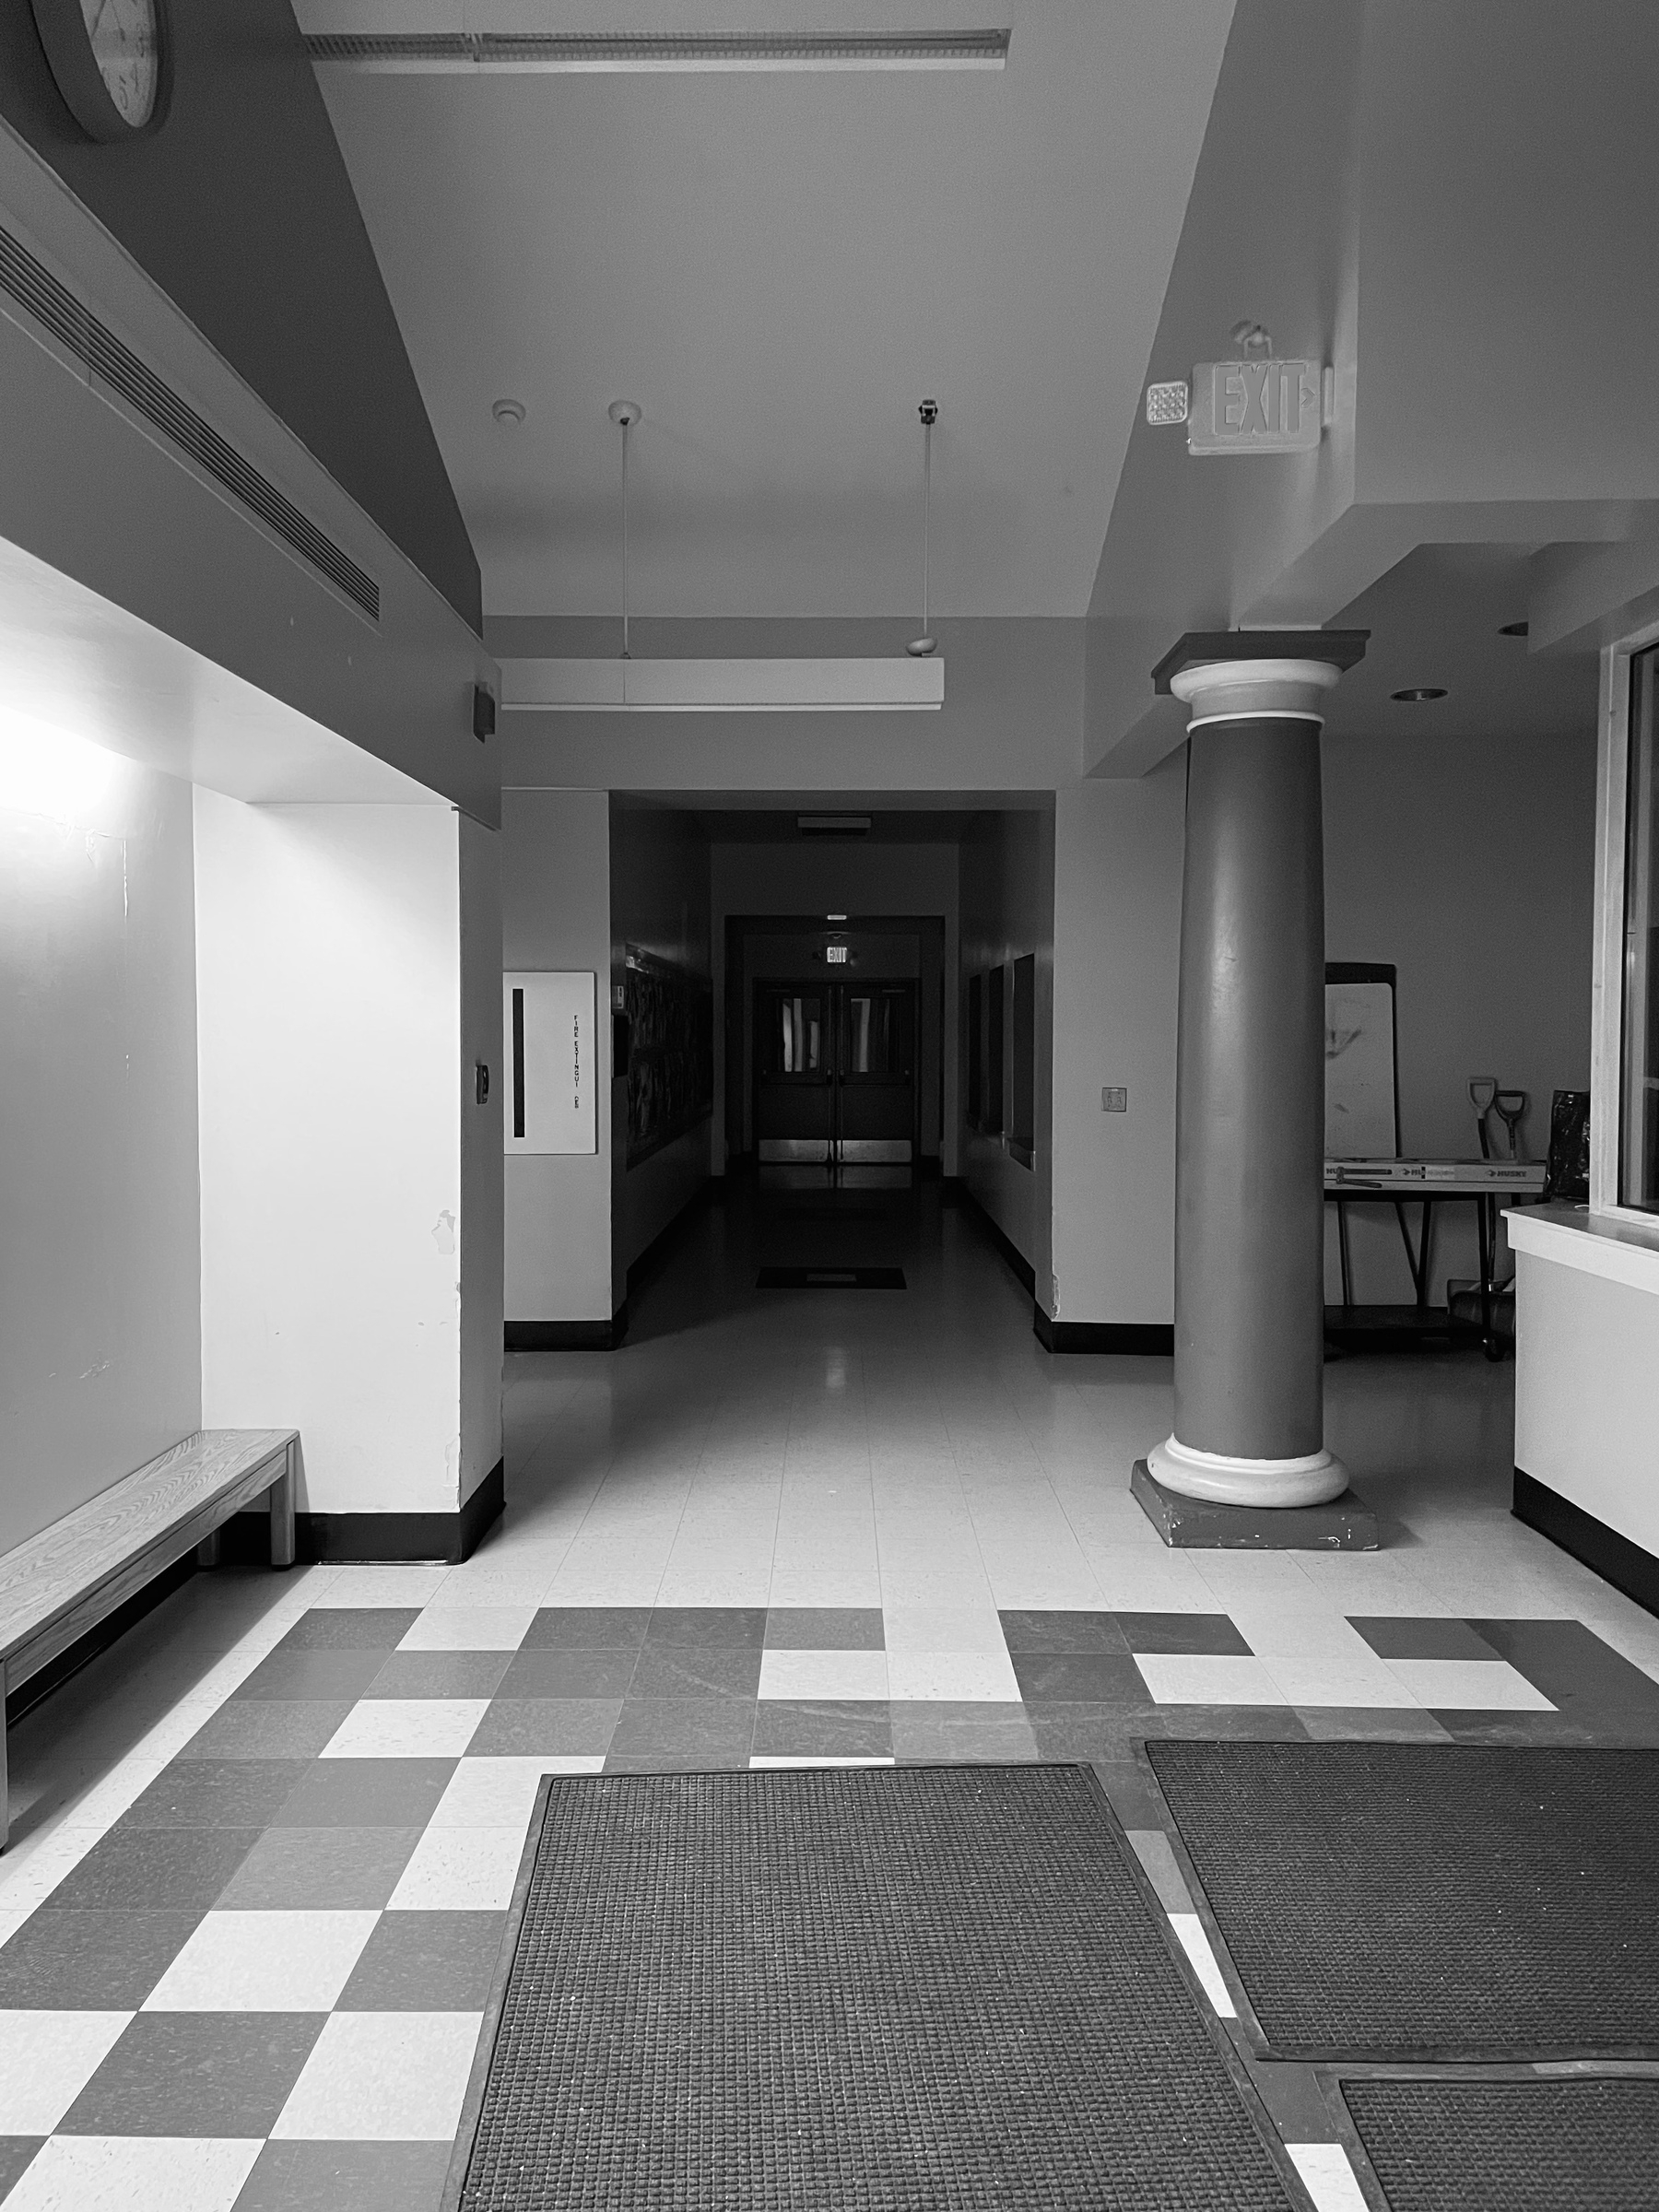 Black and white photo of a school hallway at night